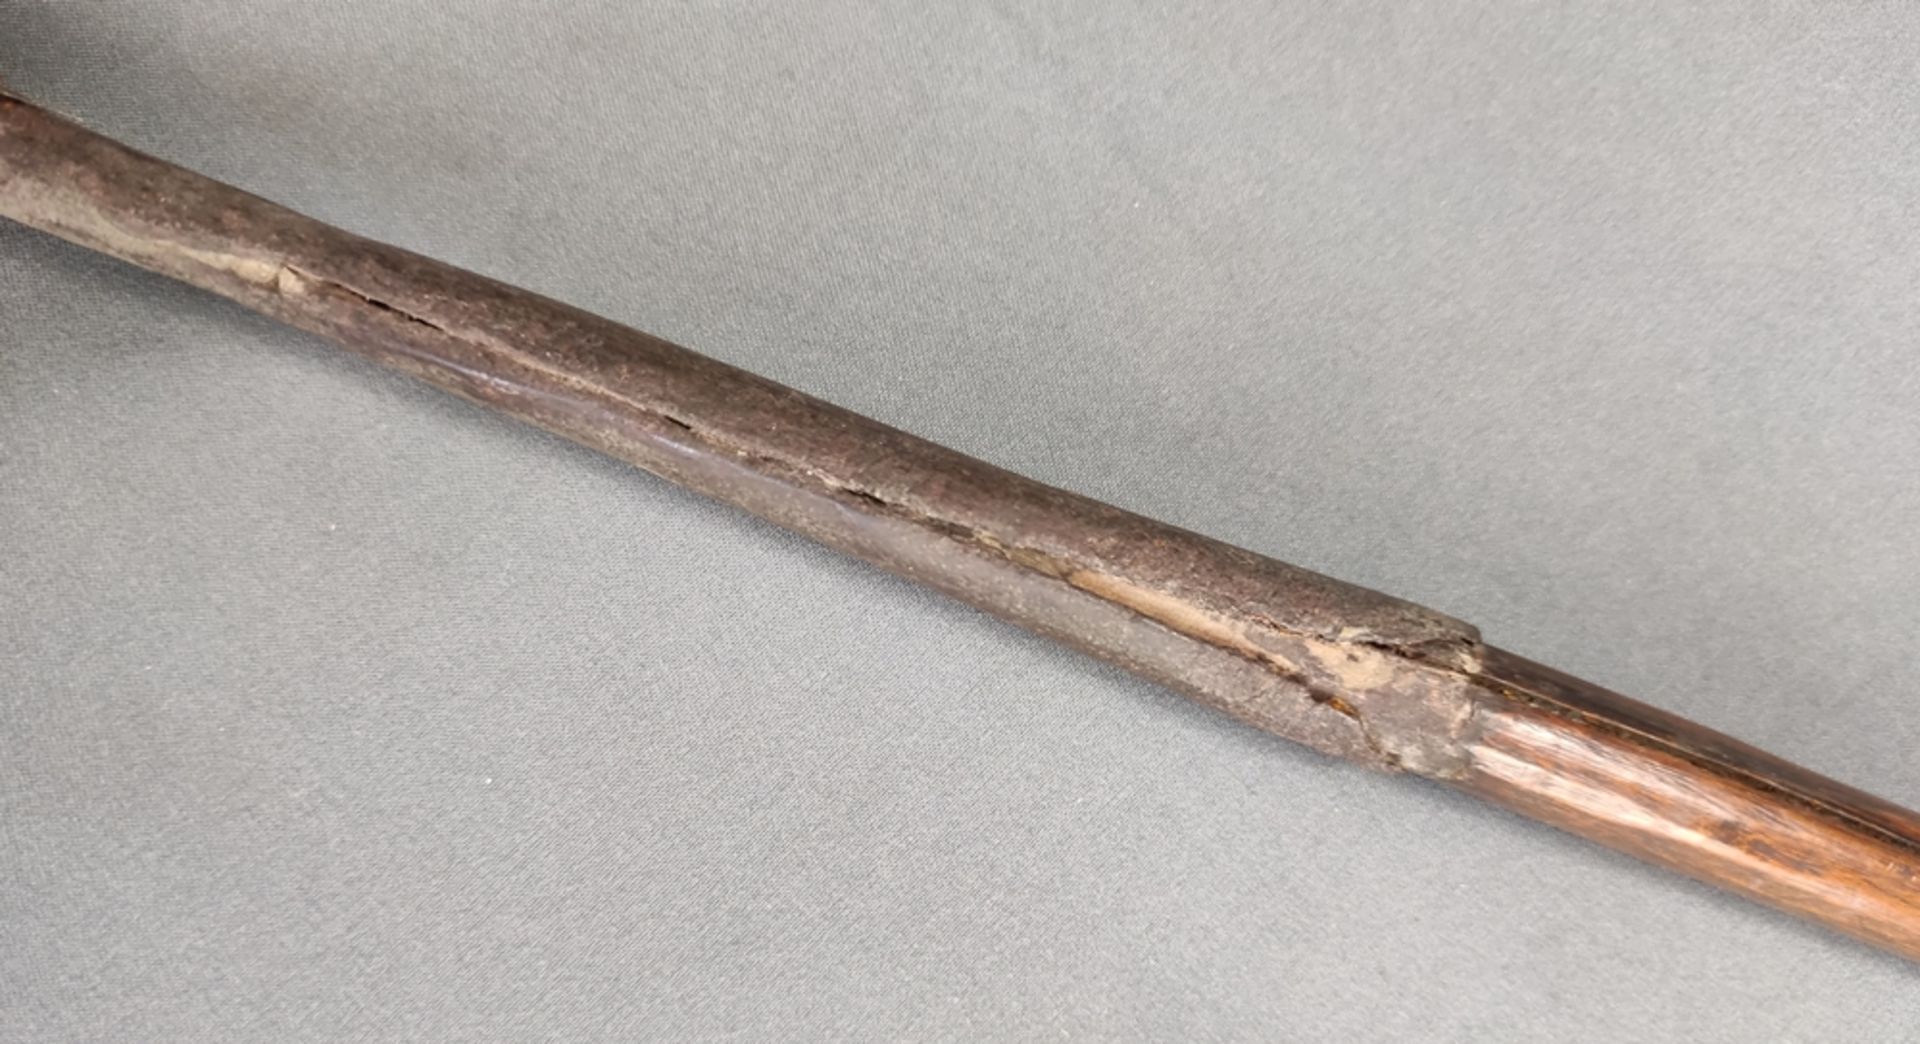 Spear with metal tip, middle part made of wood, lower part made of metal, decoration with hair, - Image 5 of 5